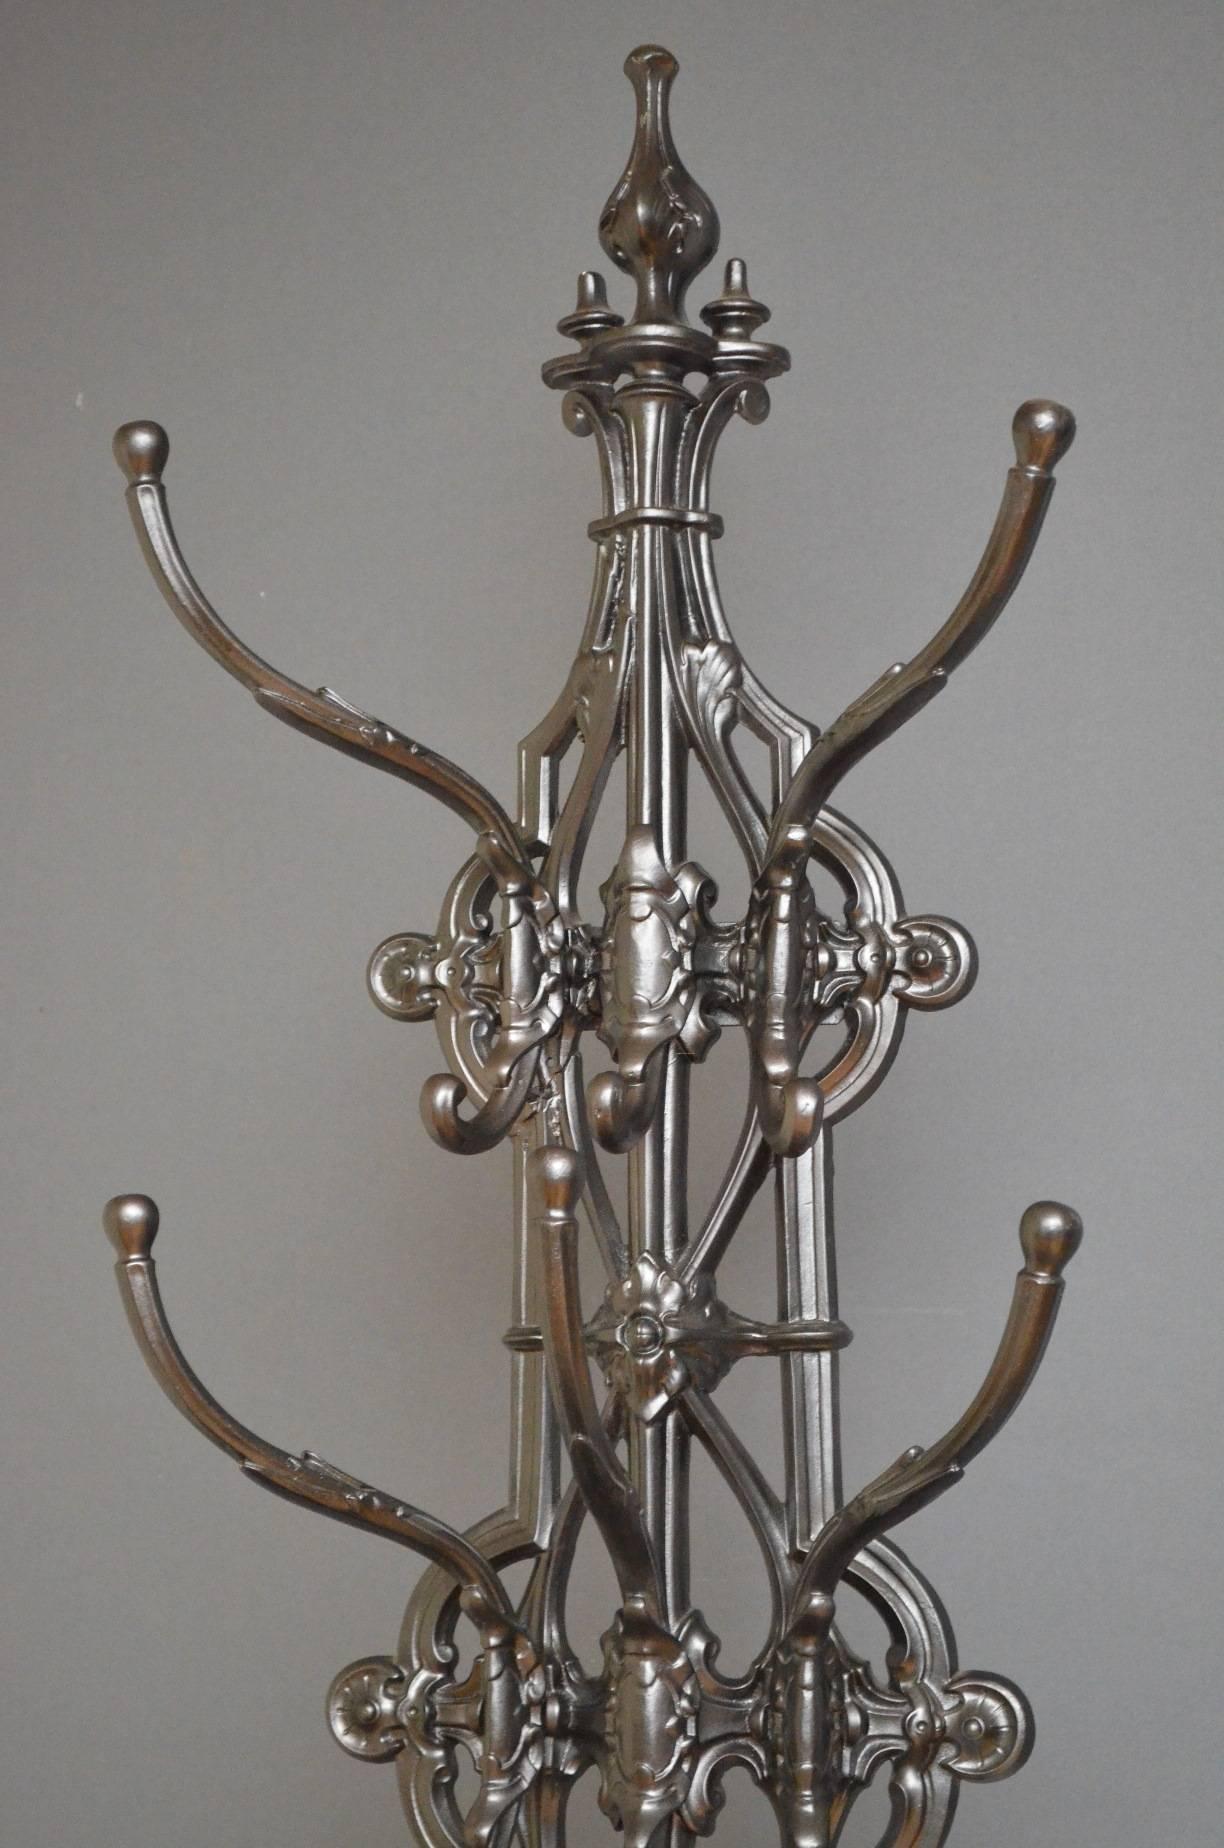 K0107. A striking Victorian Coalbrookdale hall stand of elaborate Renaissance design, having five coat hooks with foliate shell accents, tear drop shaped umbrella holders intricate pierced design to front and two shell shaped, removable trays to